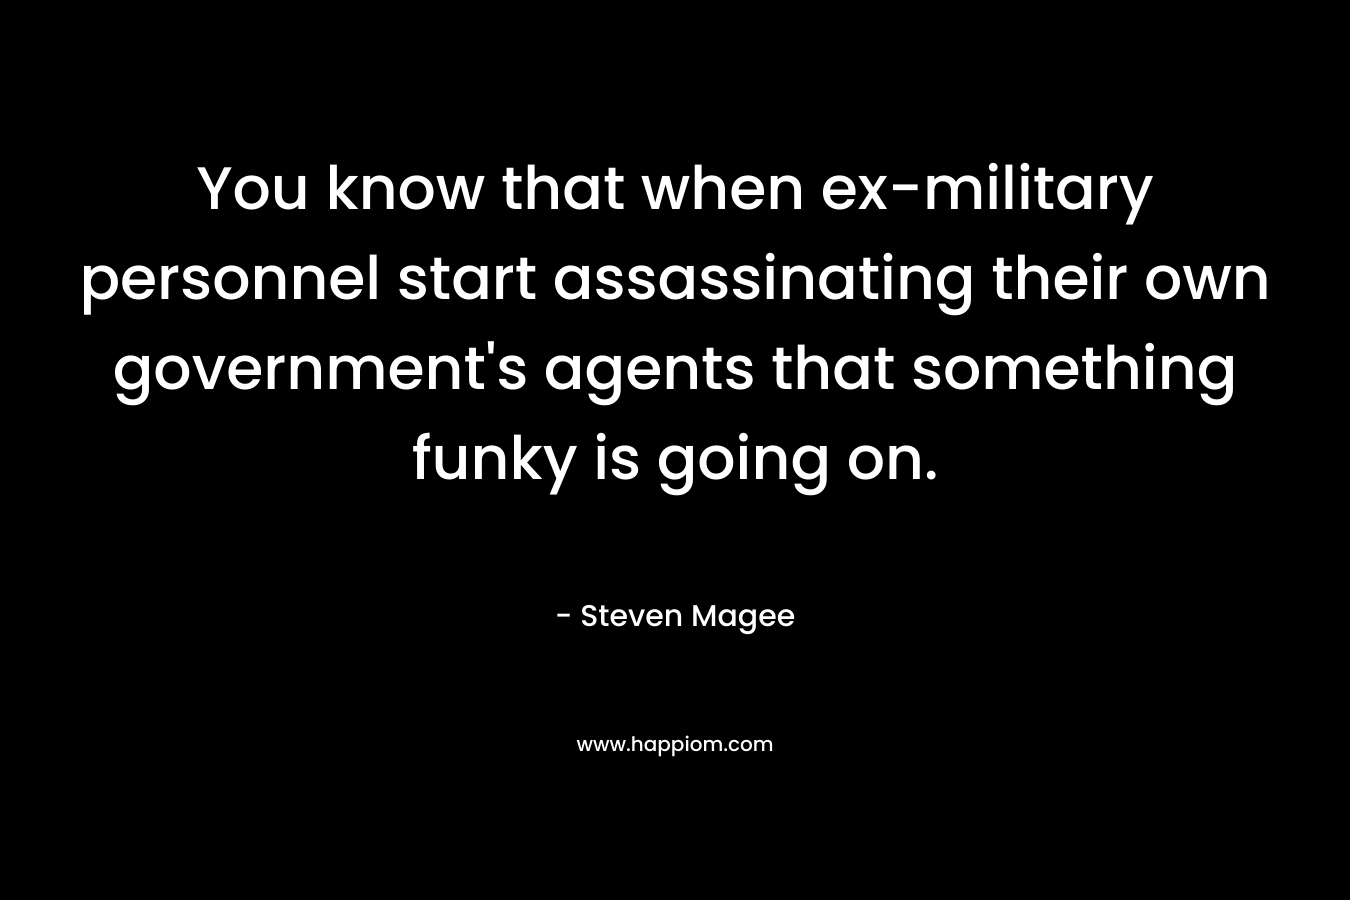 You know that when ex-military personnel start assassinating their own government's agents that something funky is going on.